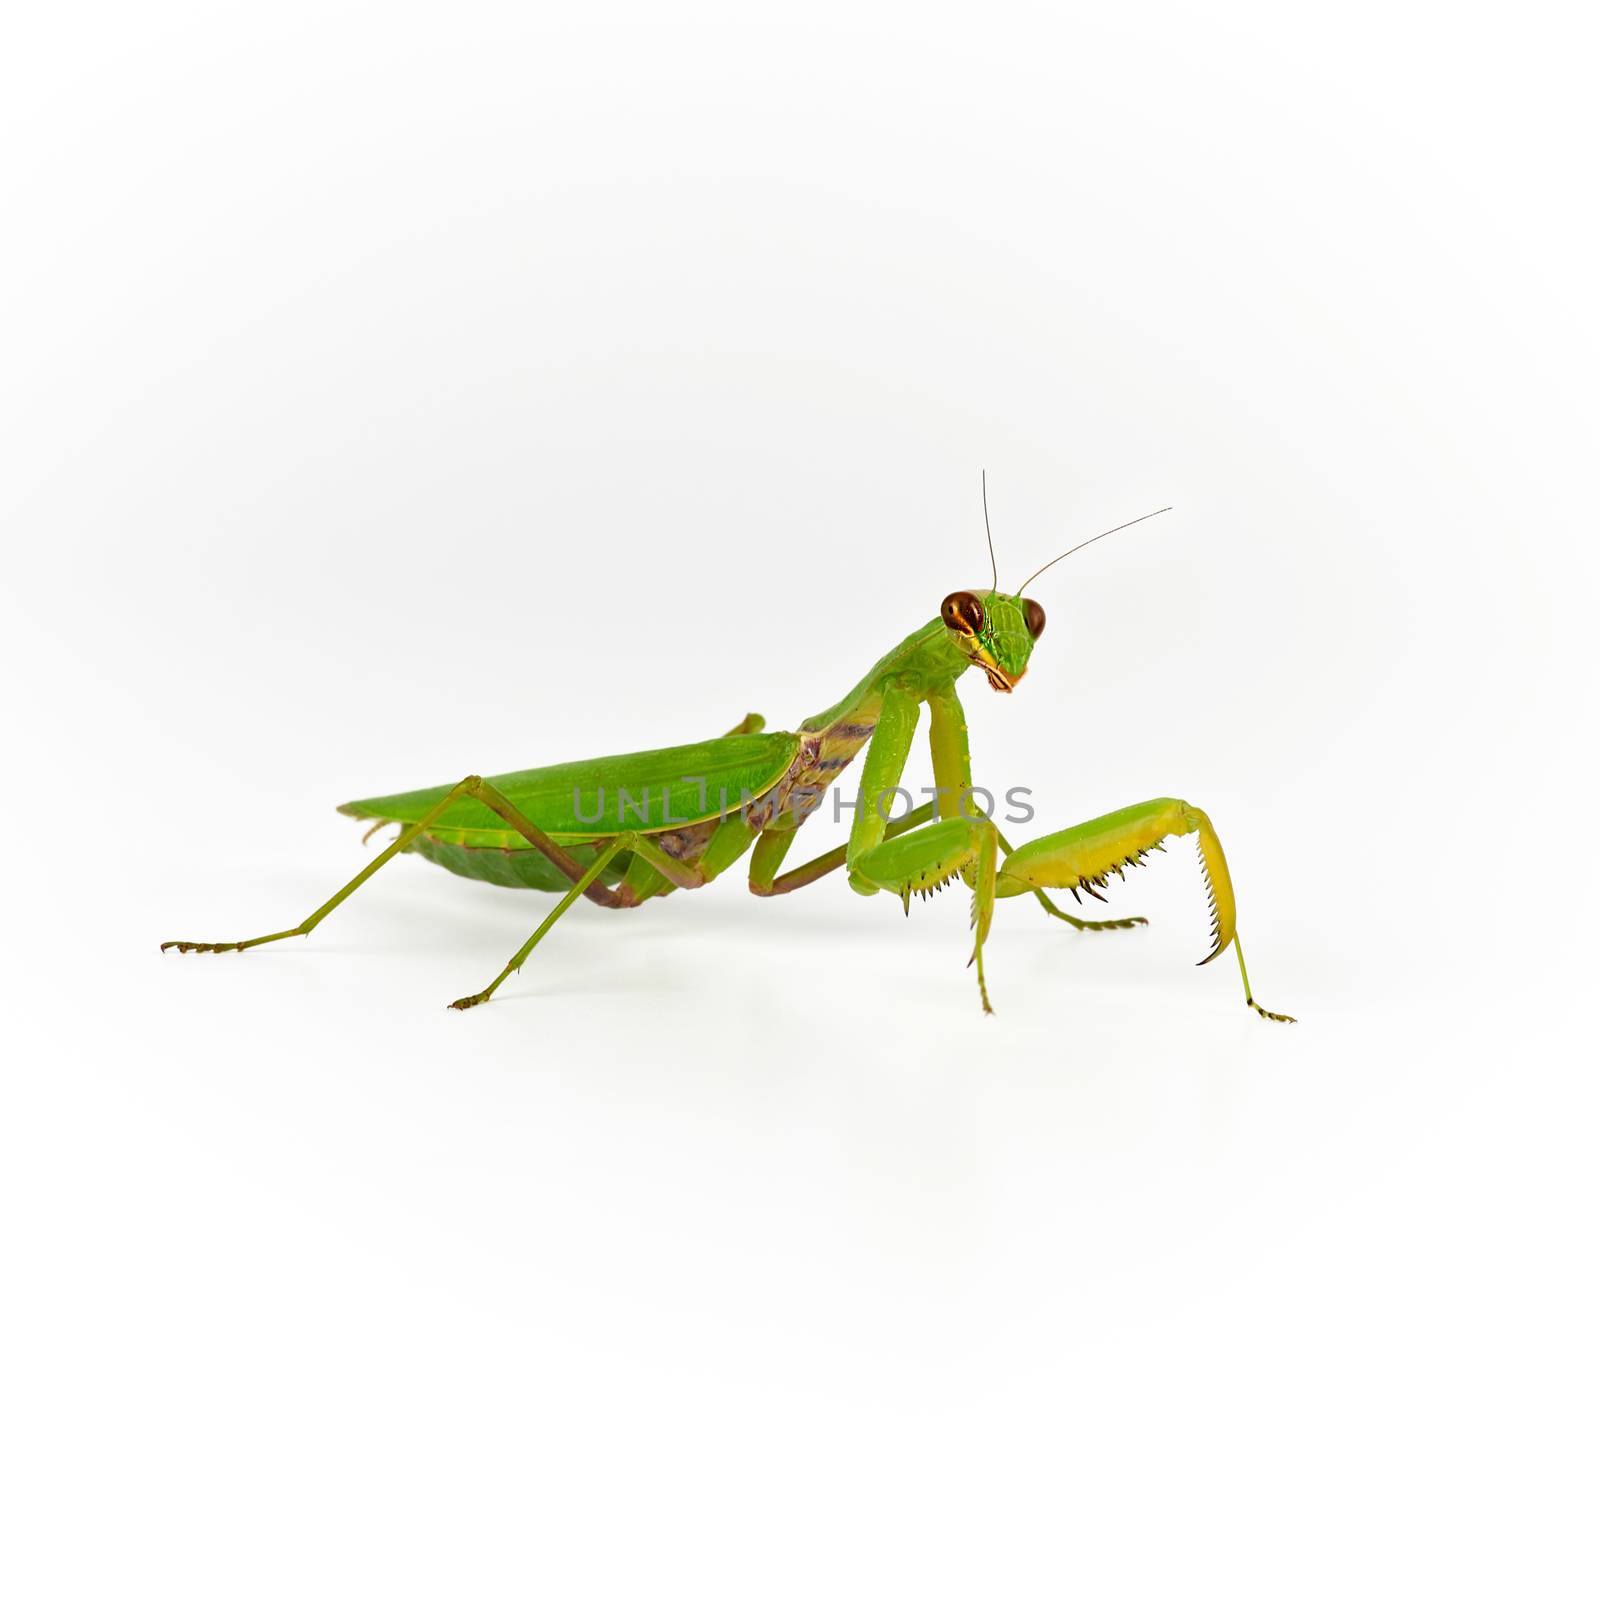  green mantis on a white background looks at the camera, close up